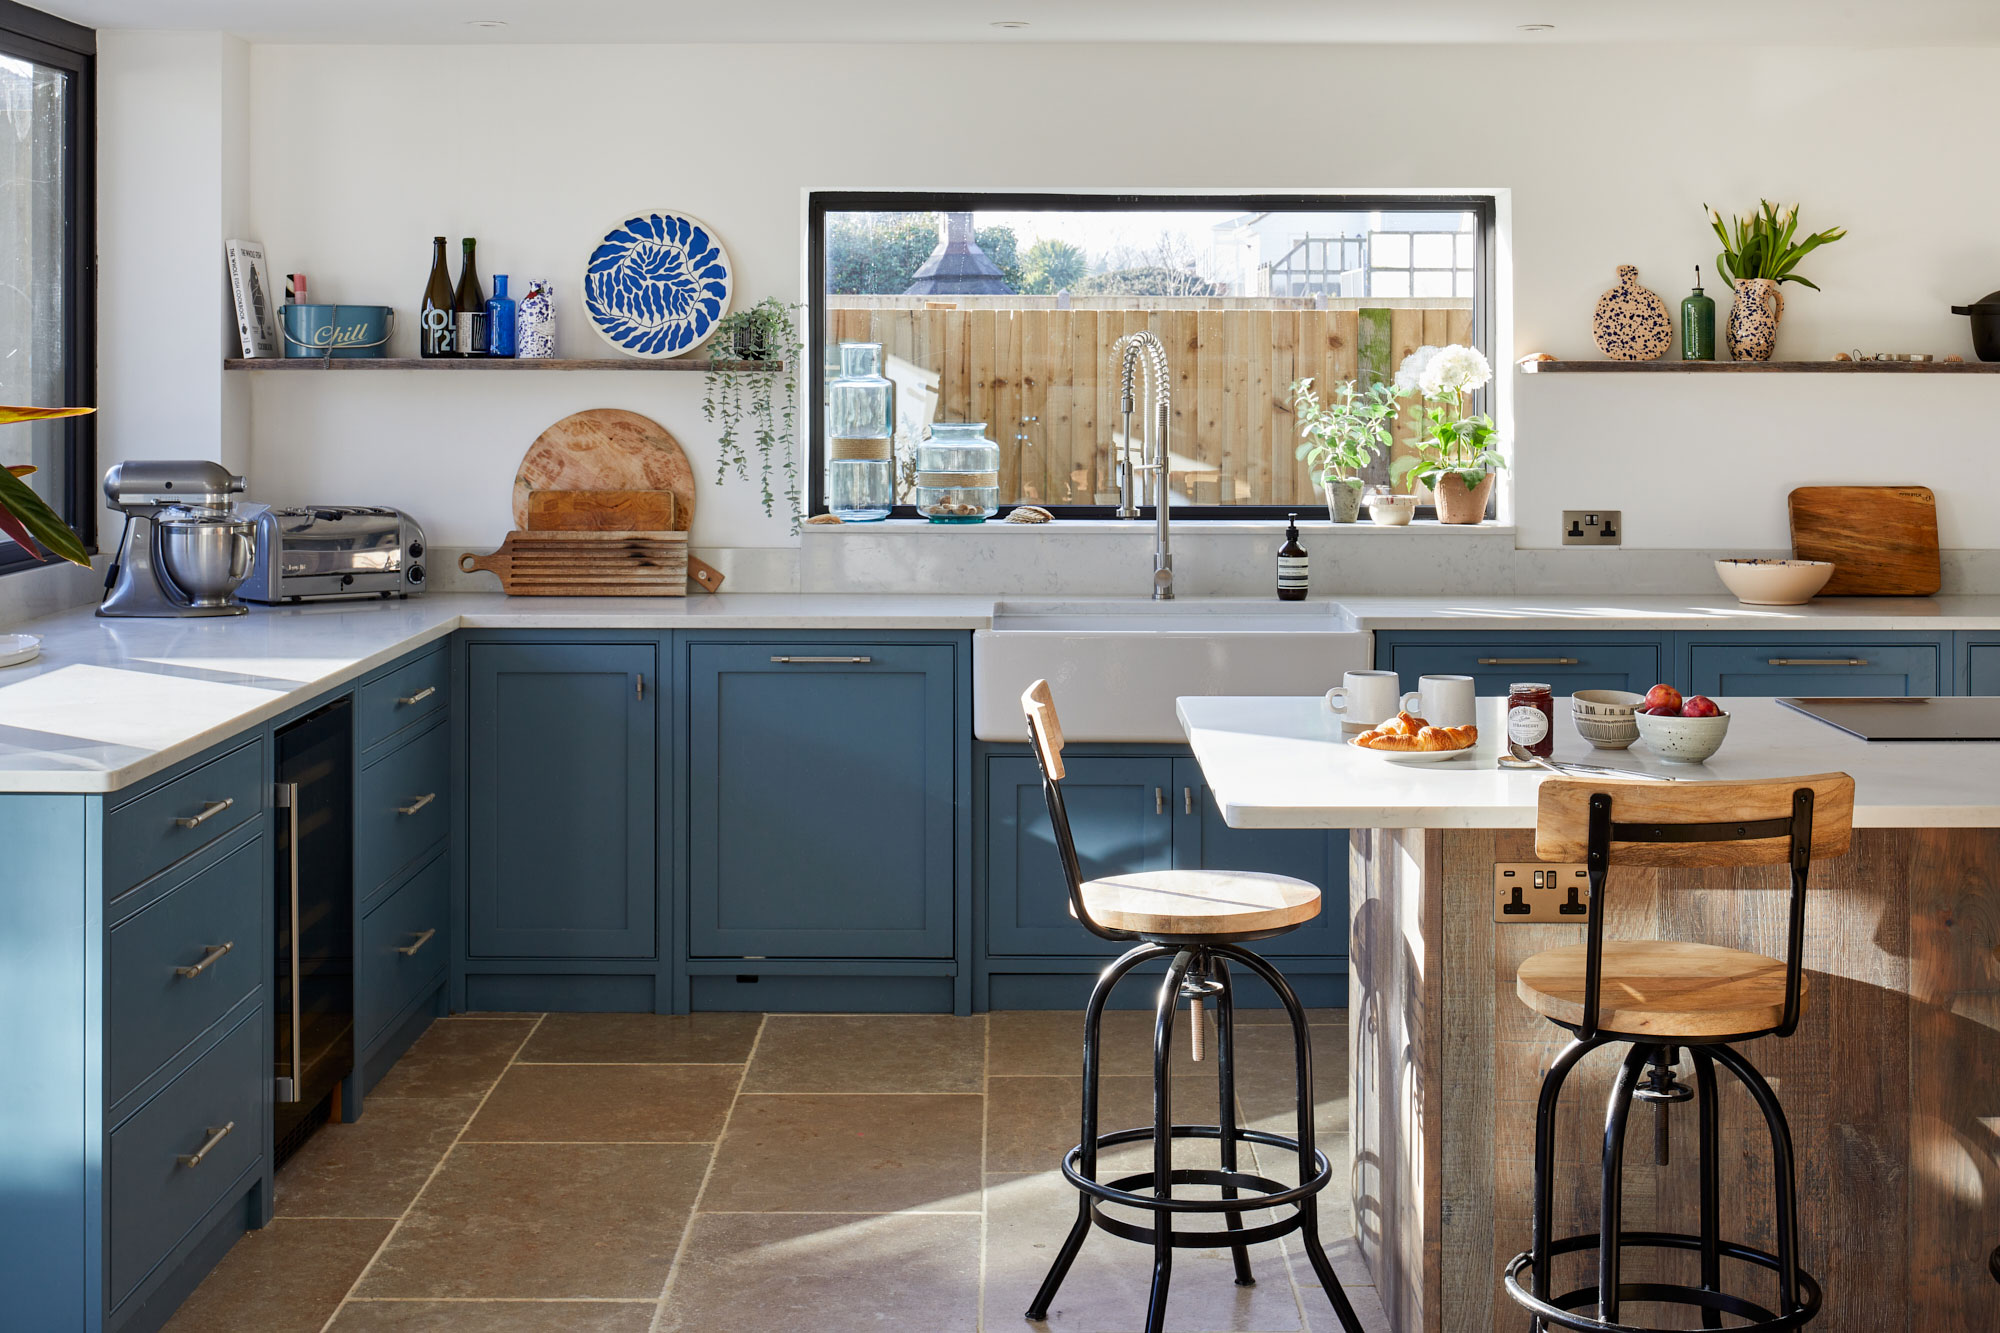 Bespoke kitchen cabinets painted in a teal blue green by Little Greene paint company